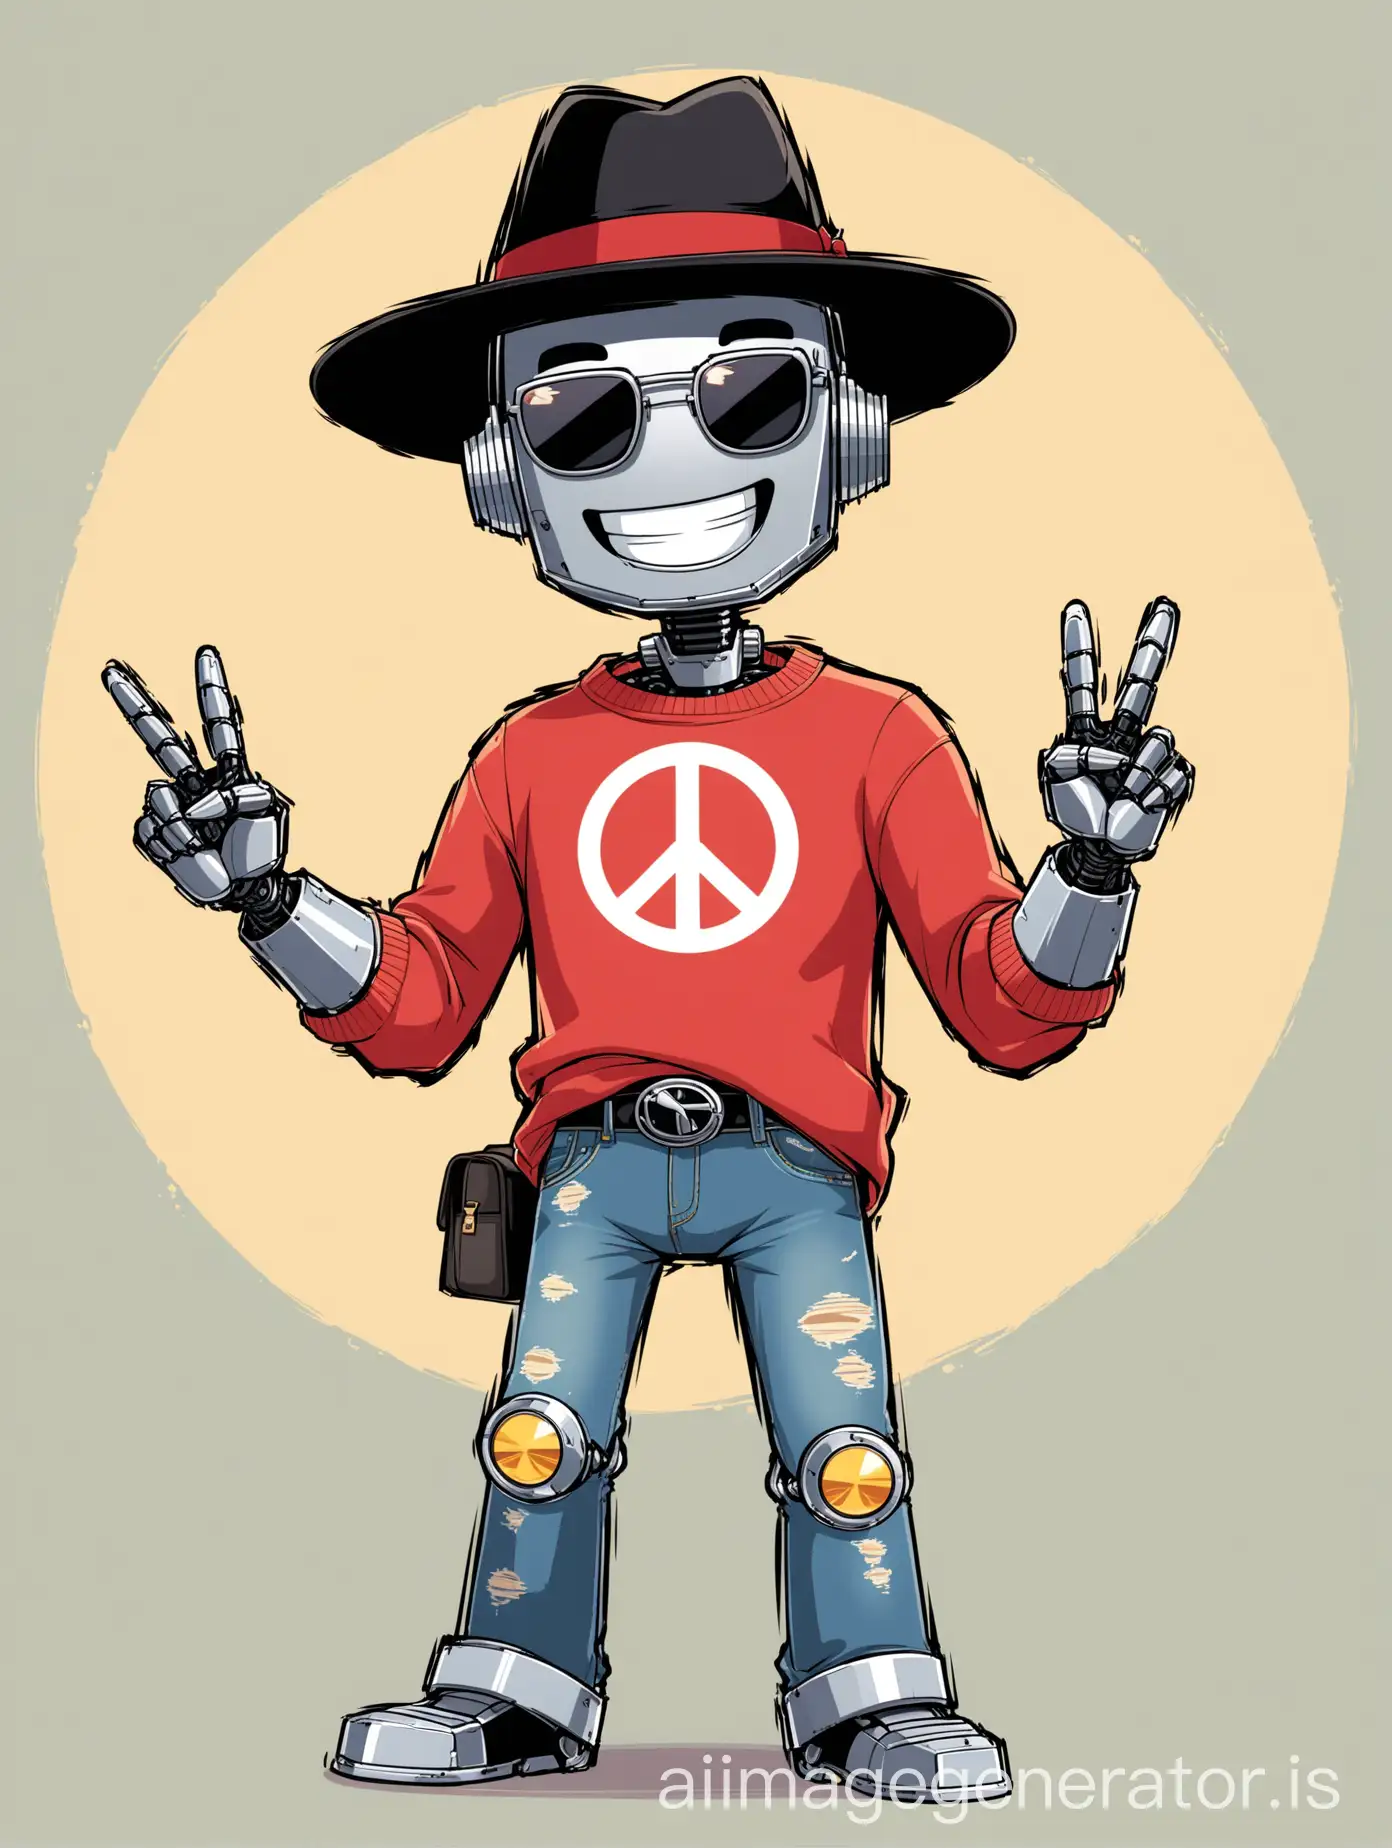 Smiling-Cartoon-Robot-Man-in-Fedora-Hat-and-Red-Sweater-with-Ripped-Jeans